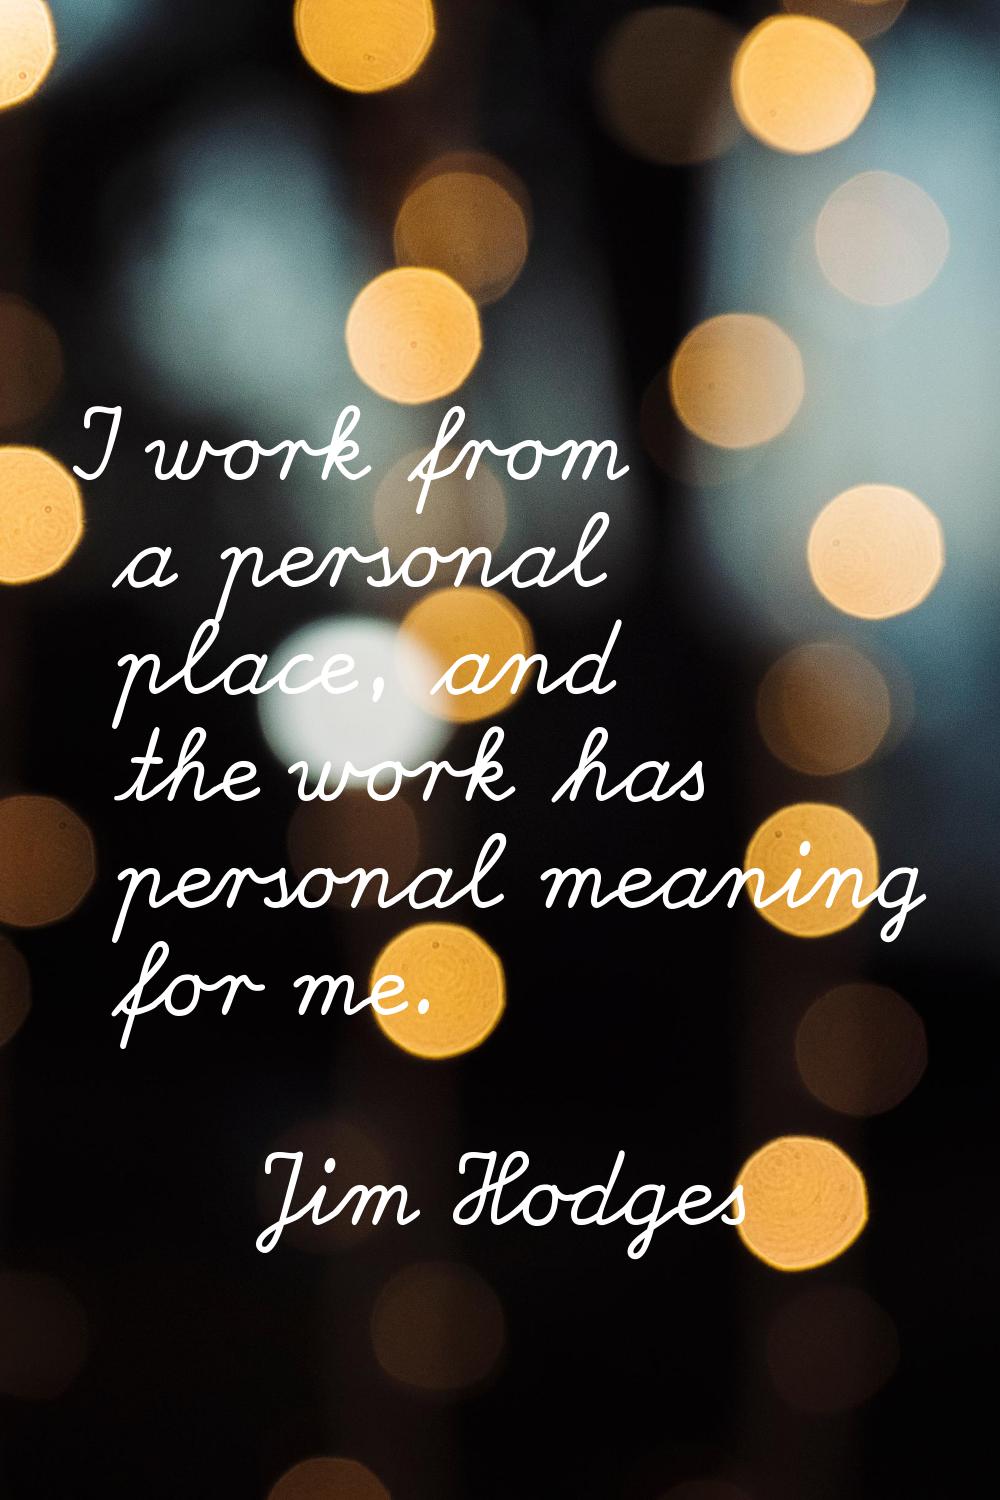 I work from a personal place, and the work has personal meaning for me.